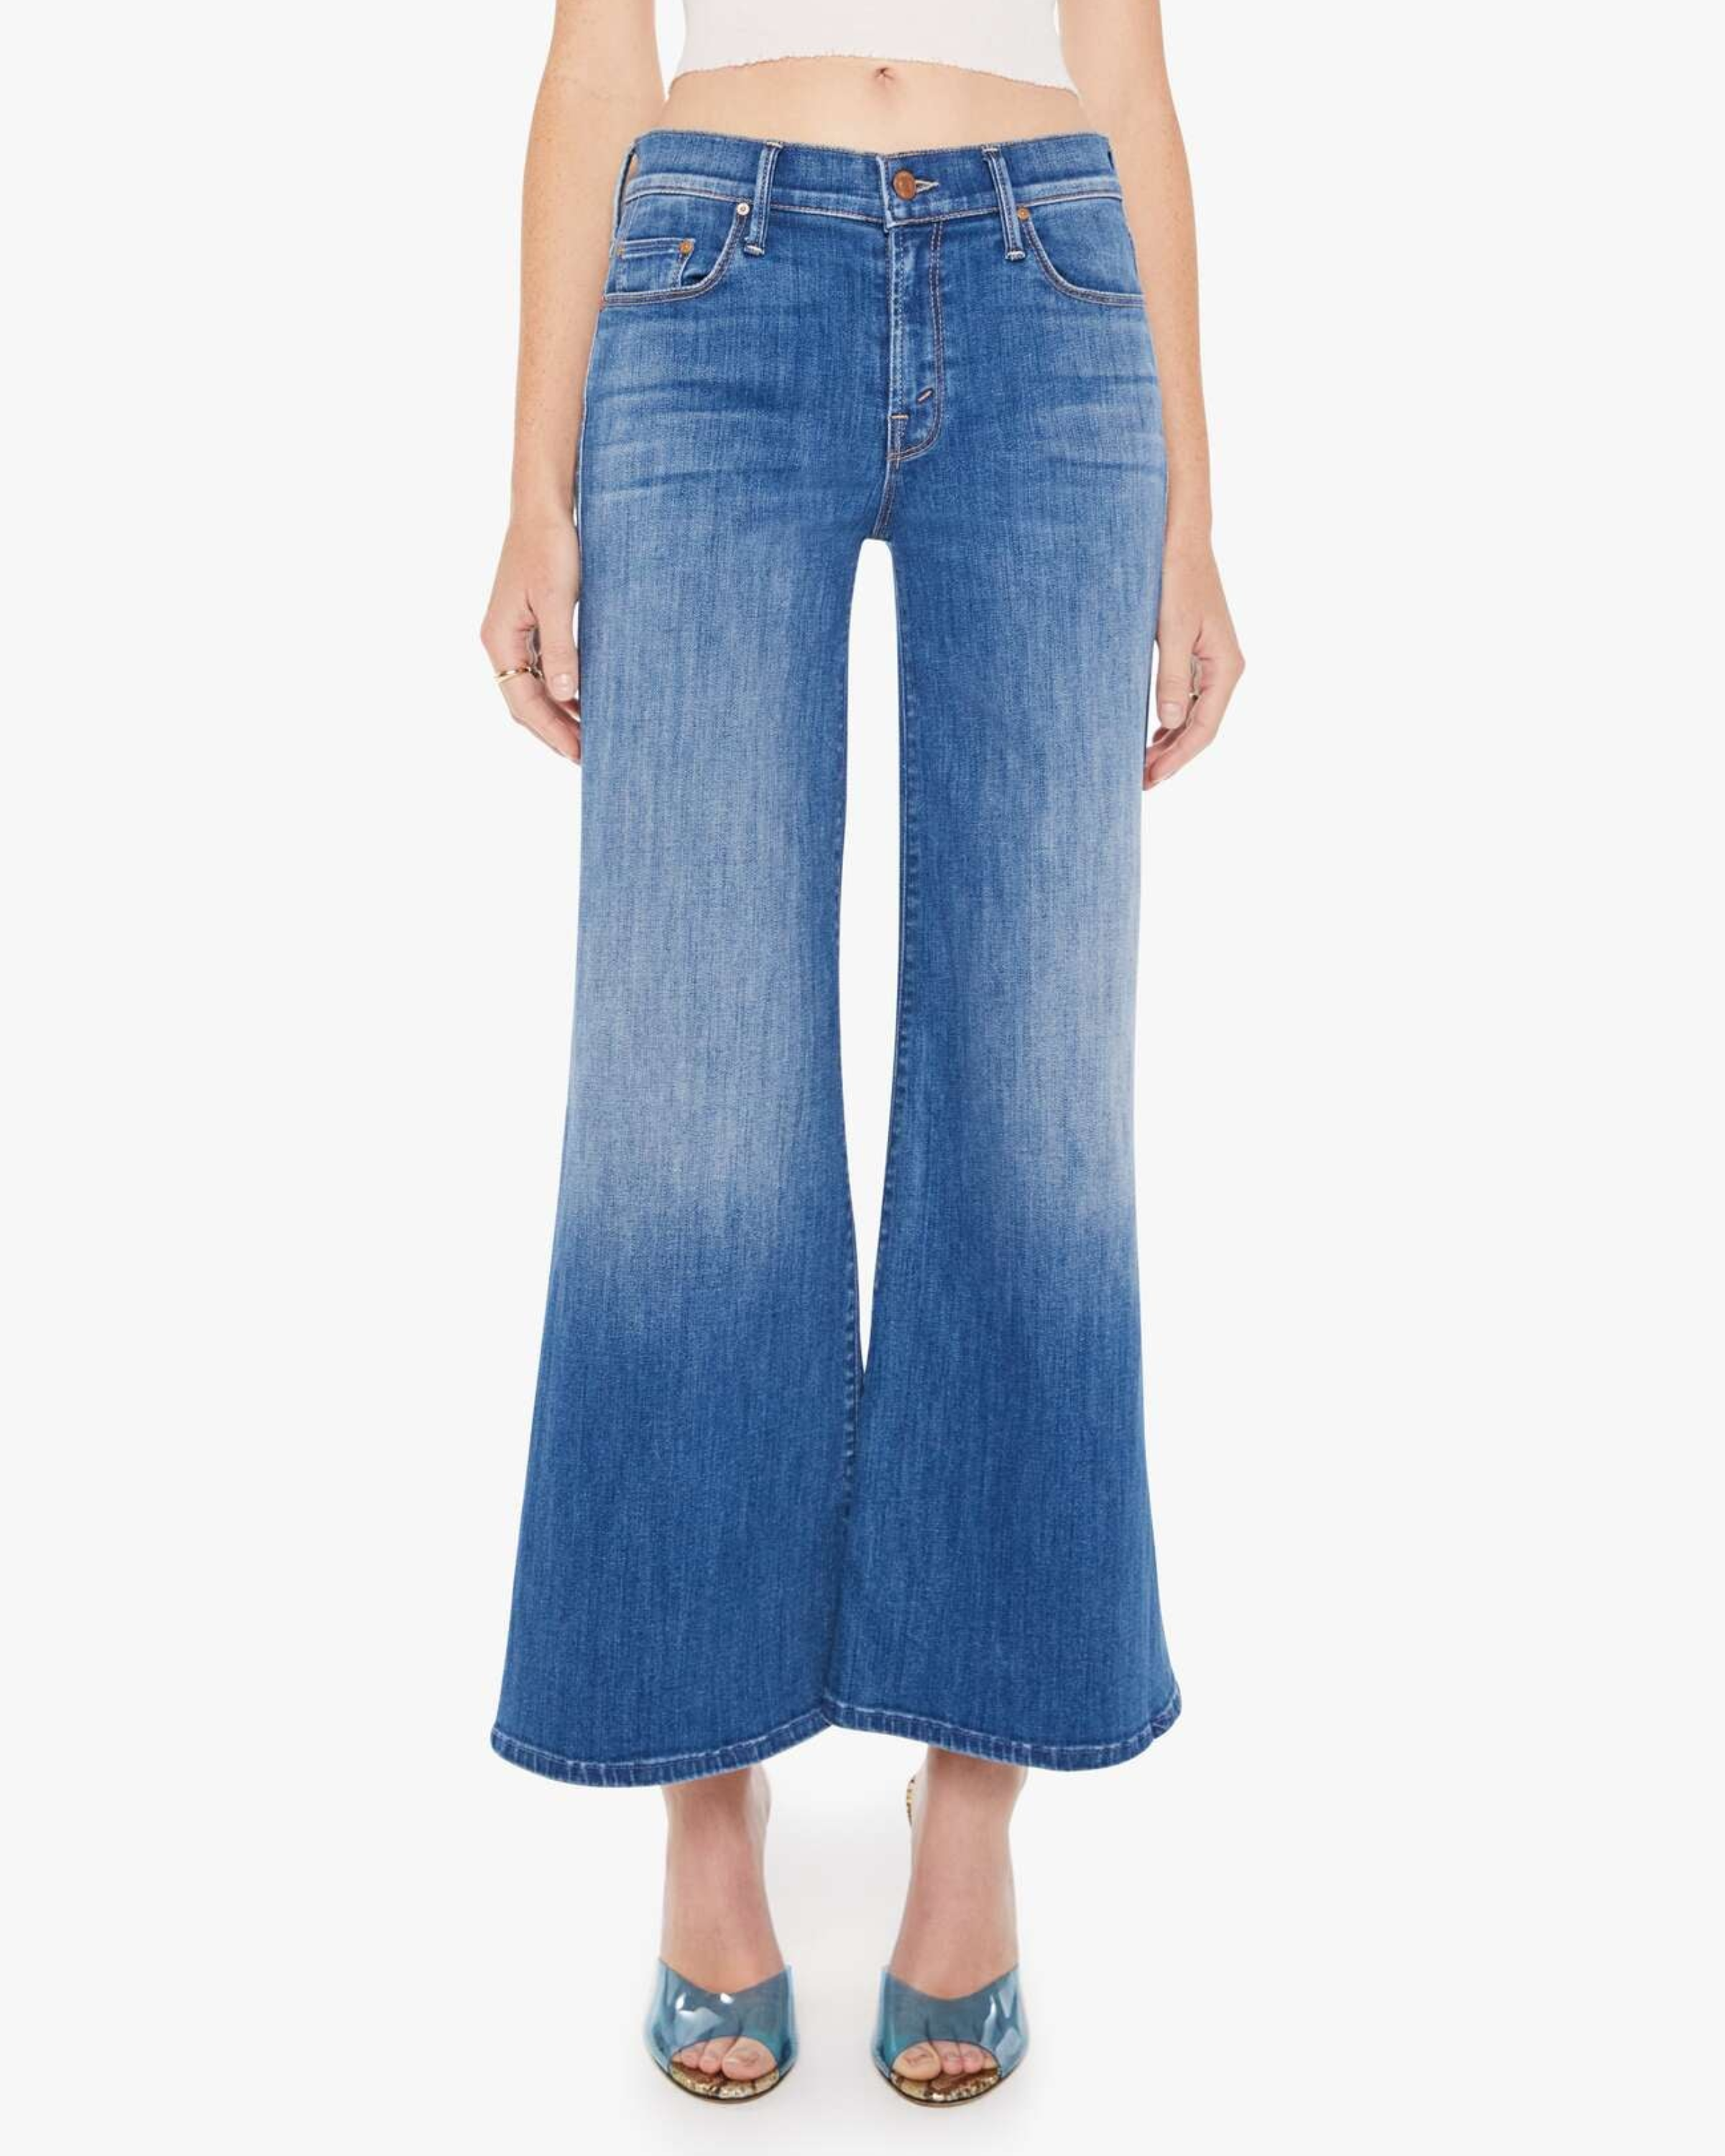 Mother The Down Low Twister Ankle Jean in We Got The Beat